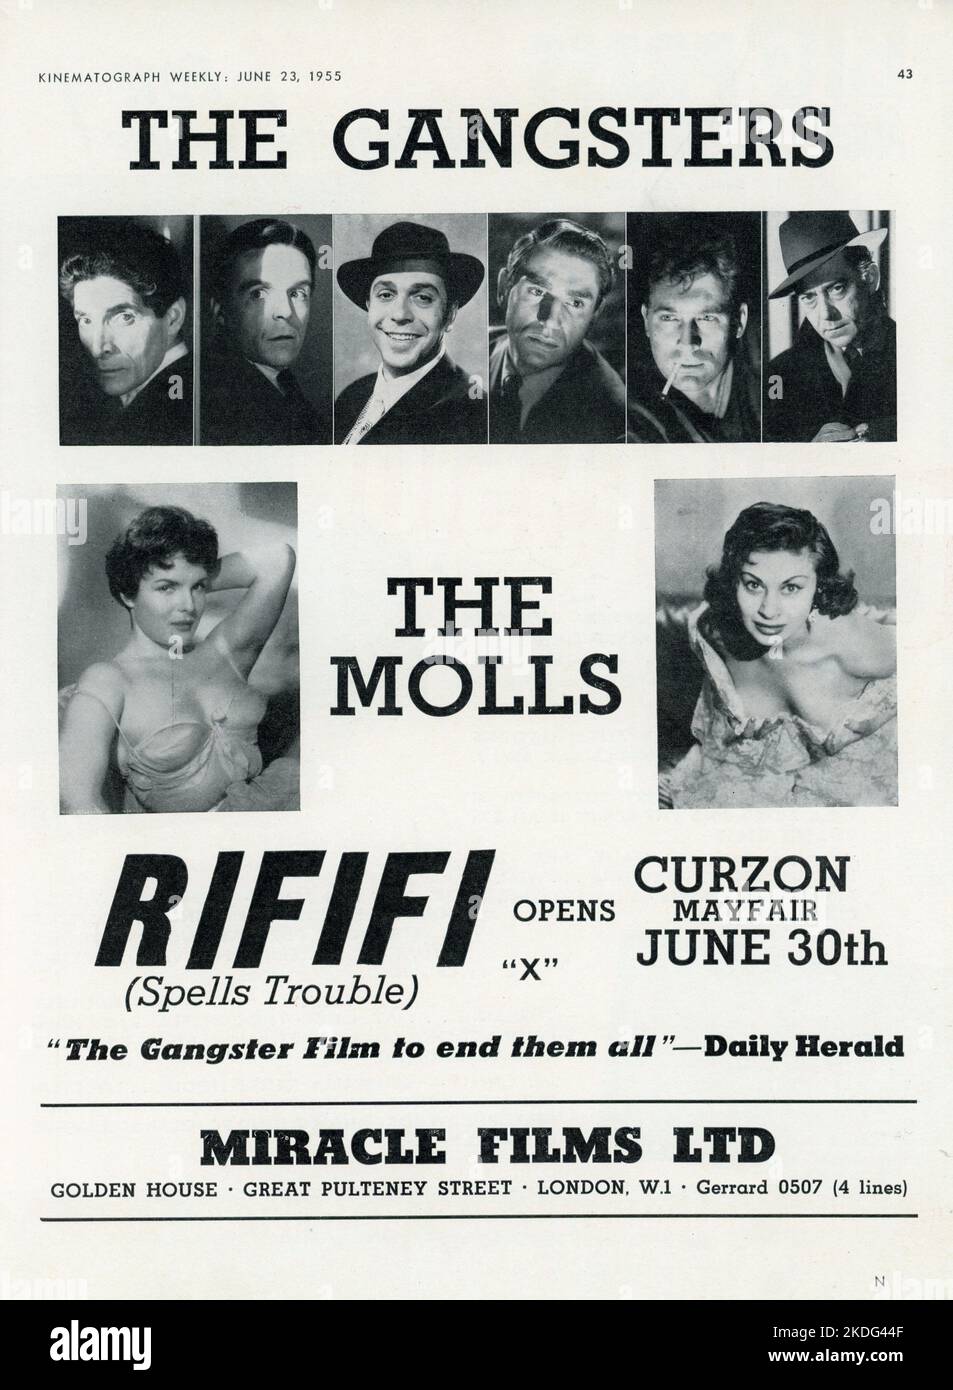 British Trade Ad for JEAN SERVAIS CARL MOHNER and ROBERT MANUEL in RIFIFI director / adaptation JULES DASSIN novel Du rififii chez les hommes by Auguste Le Breton music Georges Auric Pathe Consortium Cinema / Indusfilms / S.N. Pathe Cinema / Primafilm / Miracle Films Ltd (UK) Stock Photo